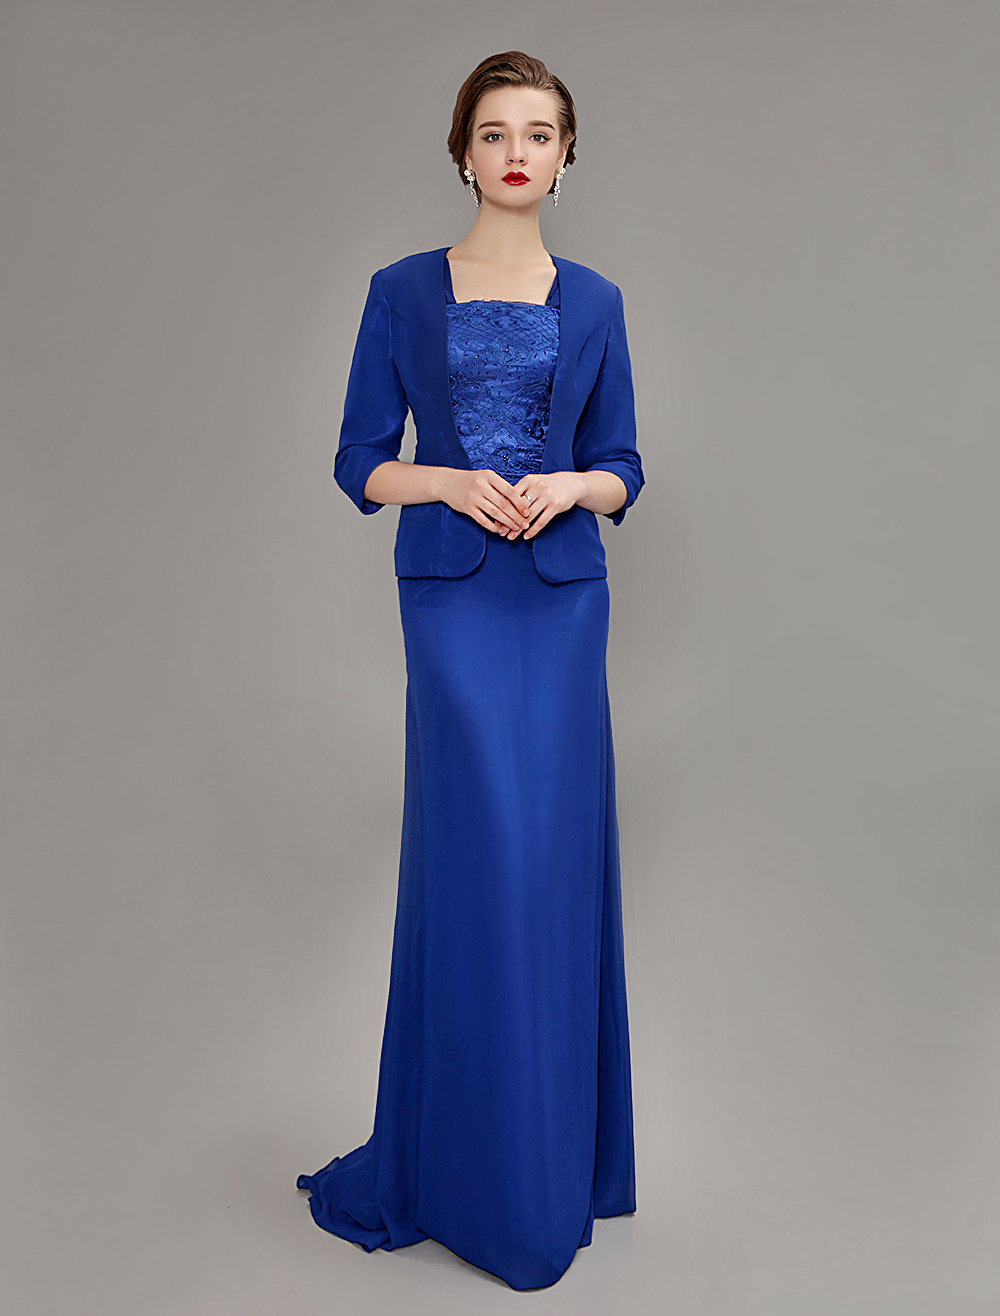 Royal Blue Chiffon Lace Mother Of Bride Dress With Train and Jacket (Wedding) photo